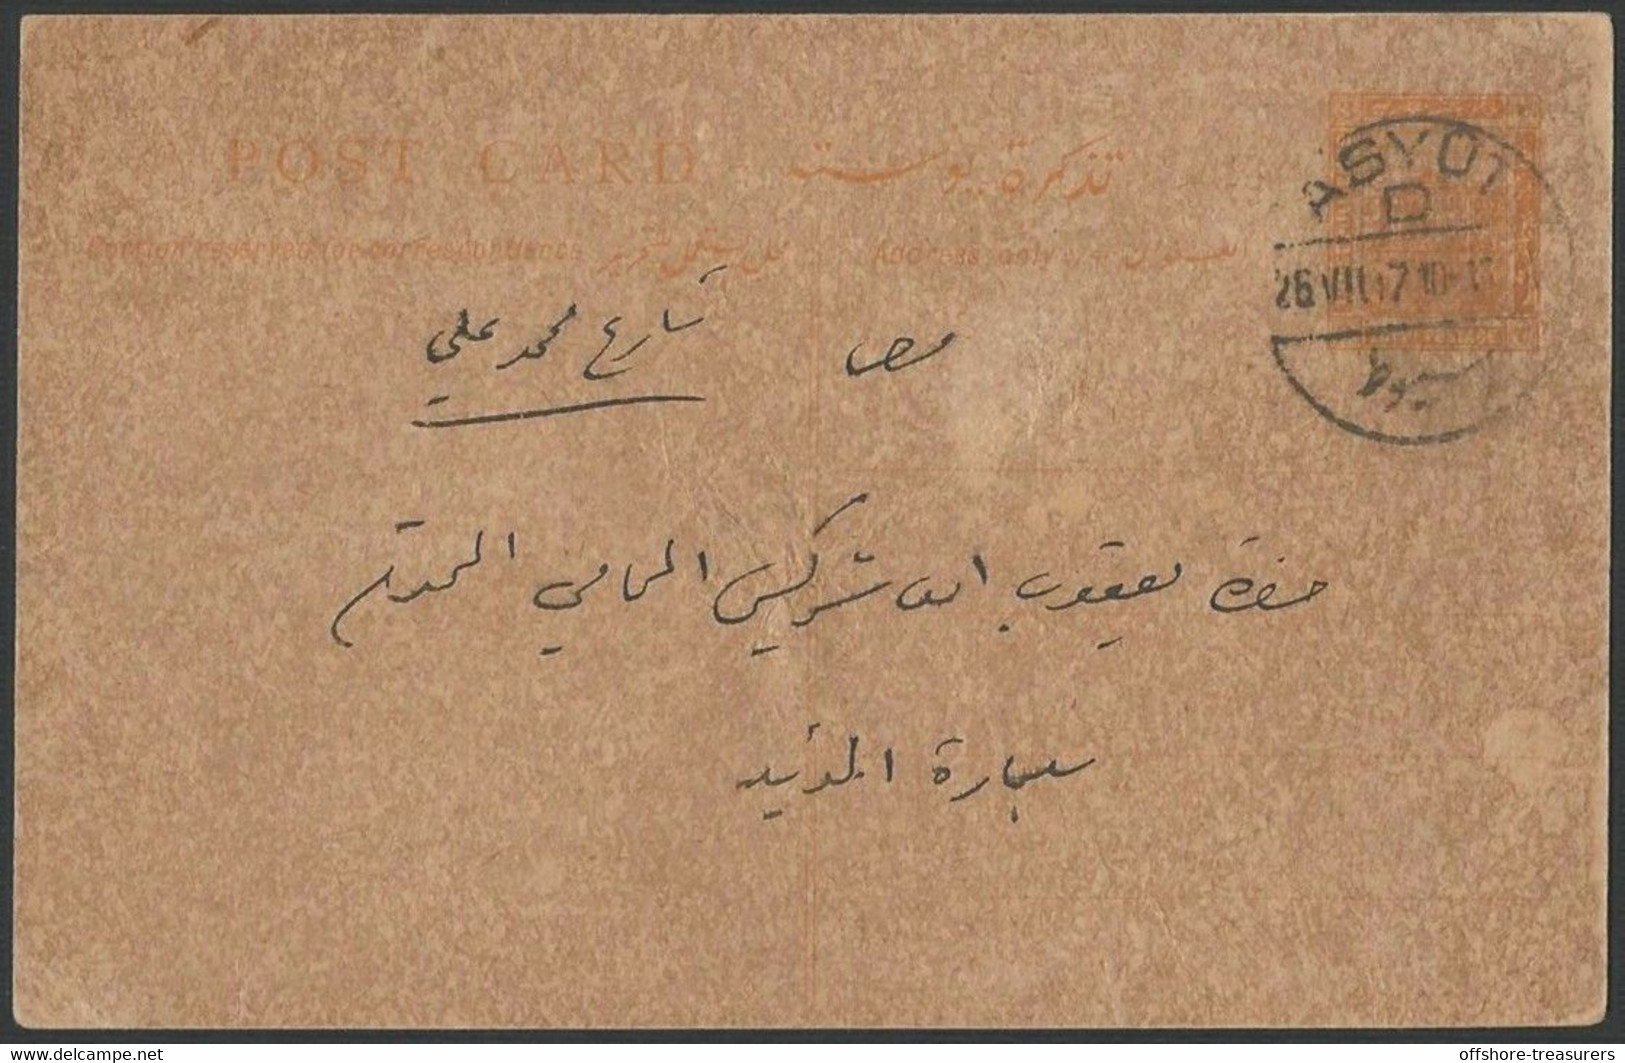 Egypt Protectorate 1917 British Occupation World War I 3 Mills Stationery Card Asyot-Asyut Cairo Domestic Usage Example - Asiut